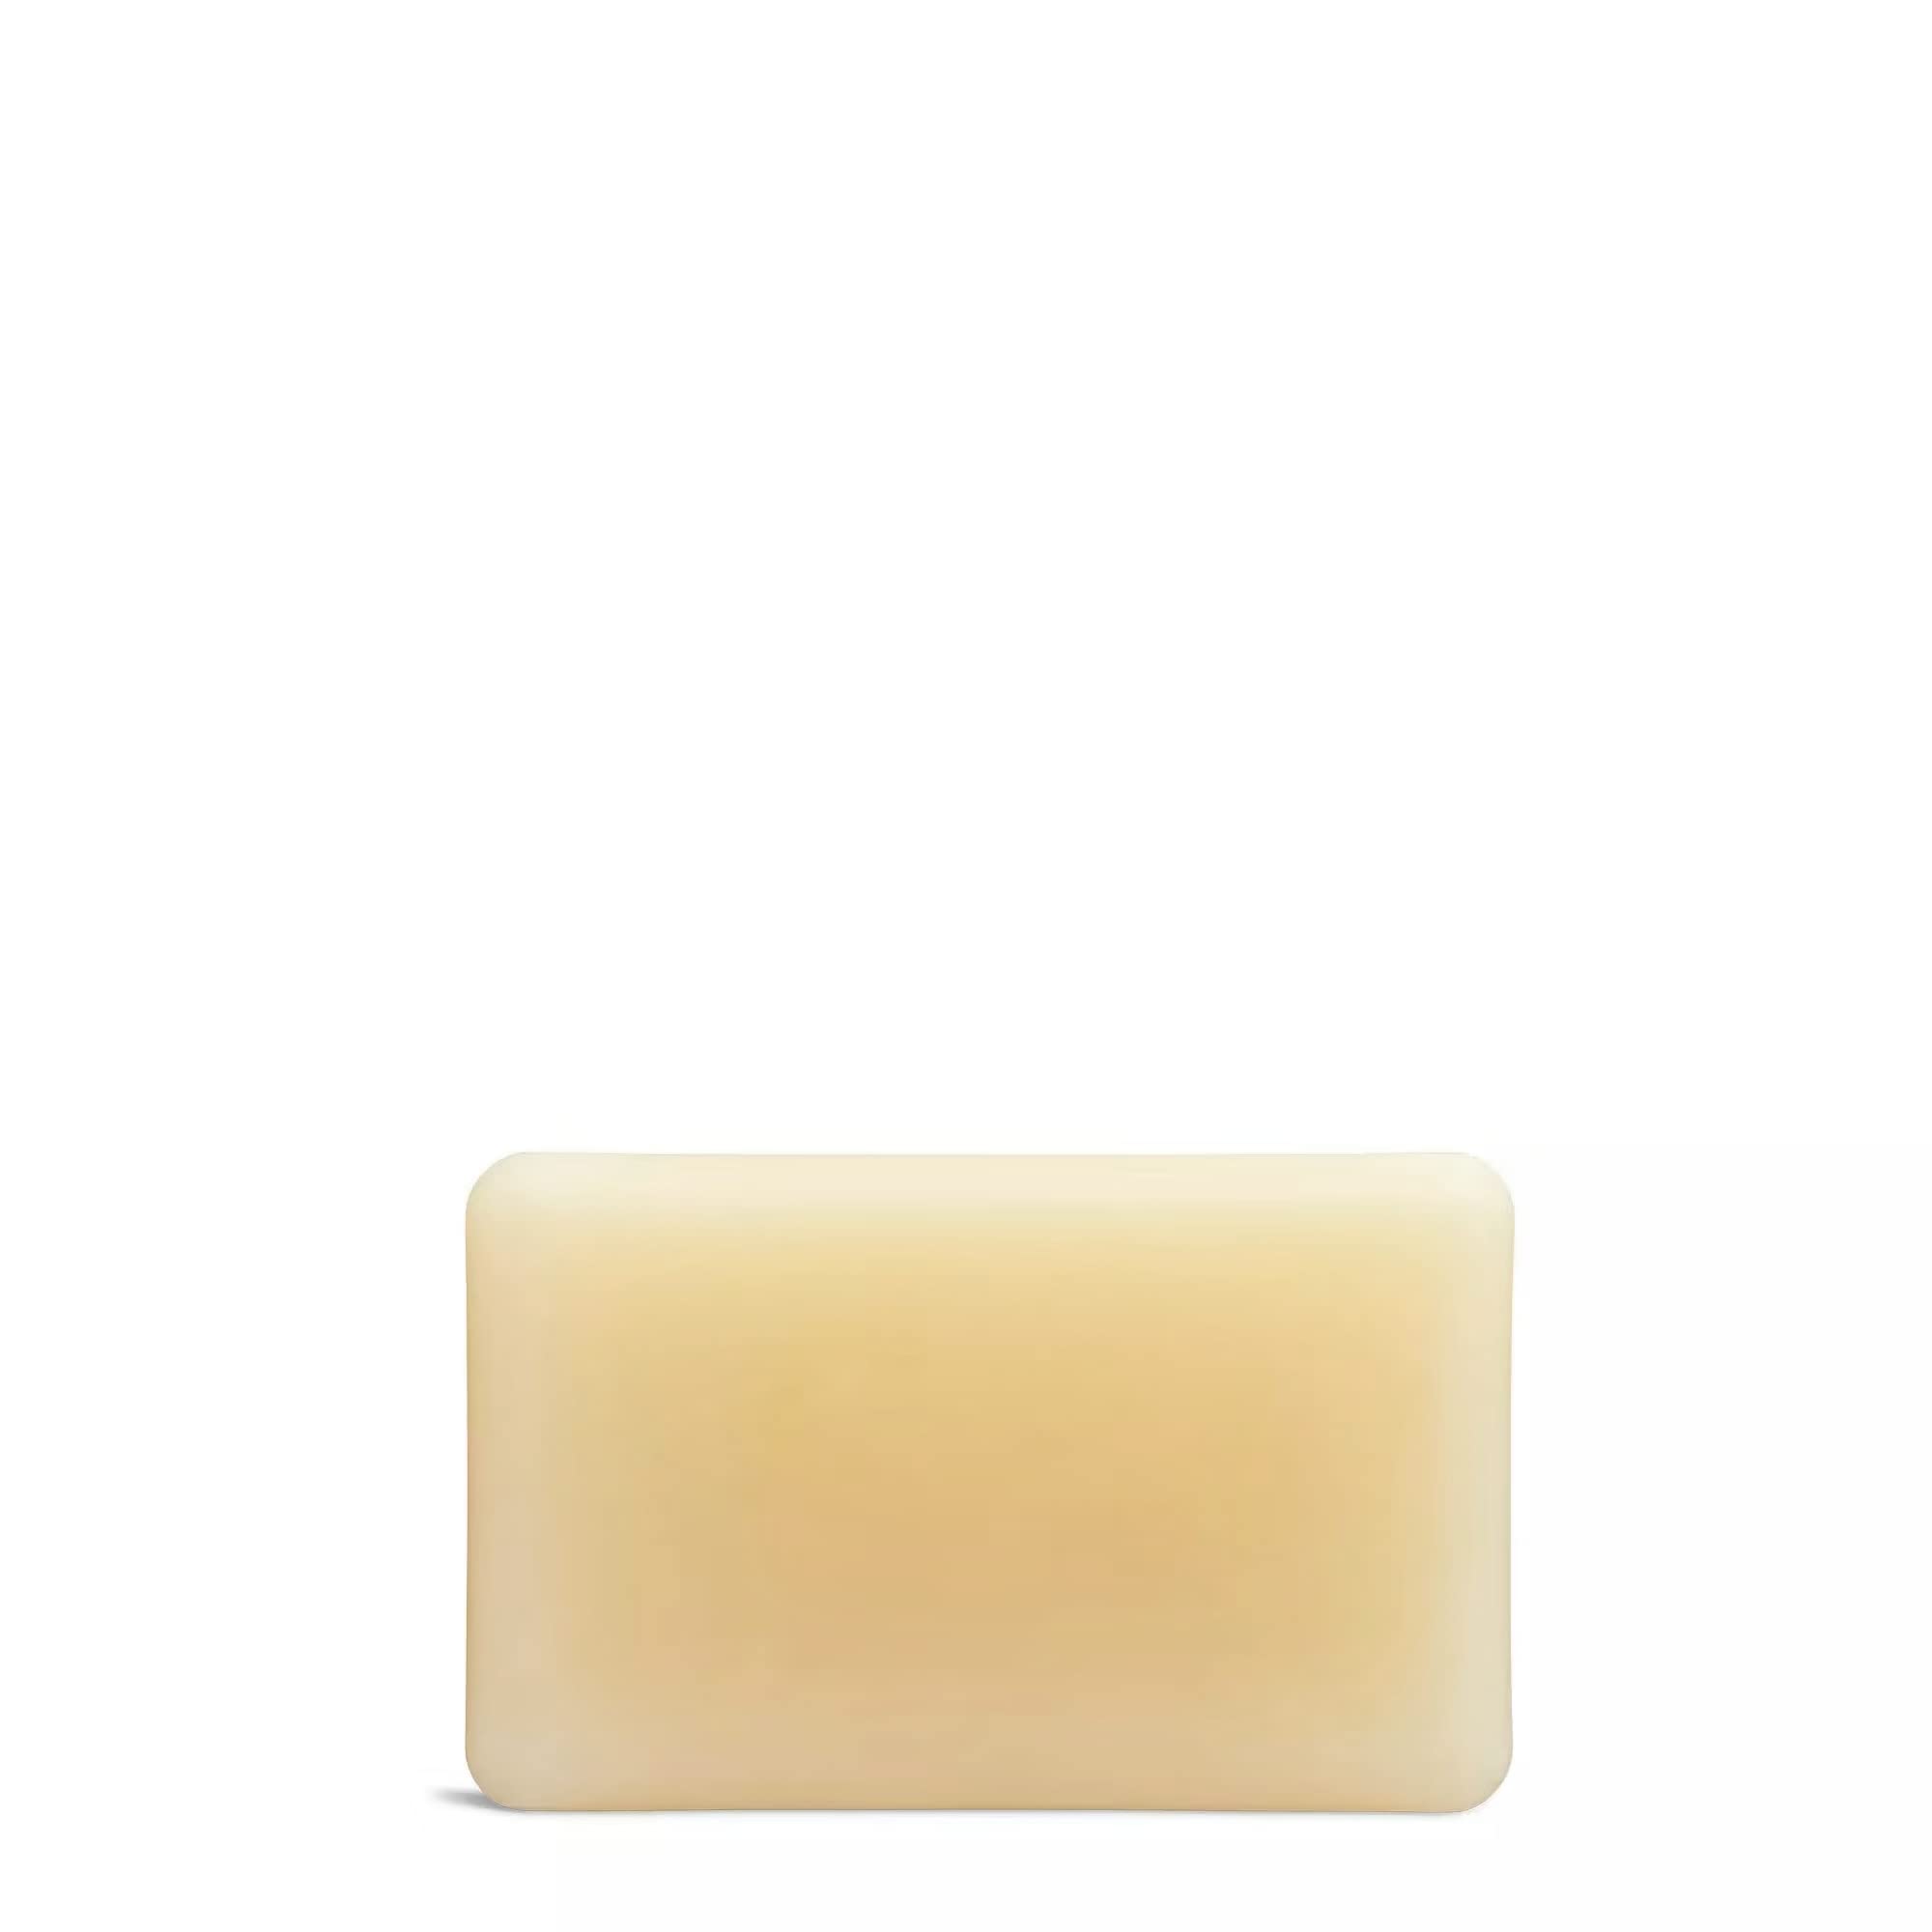 ATTITUDE Plastic-Free Bath and Shower Body Soap Bar, EWG Verified, Plant and Mineral-Based Ingredients, Vegan and Cruelty-free Personal Care Products, Patchouli and Black Pepper, 113 grams